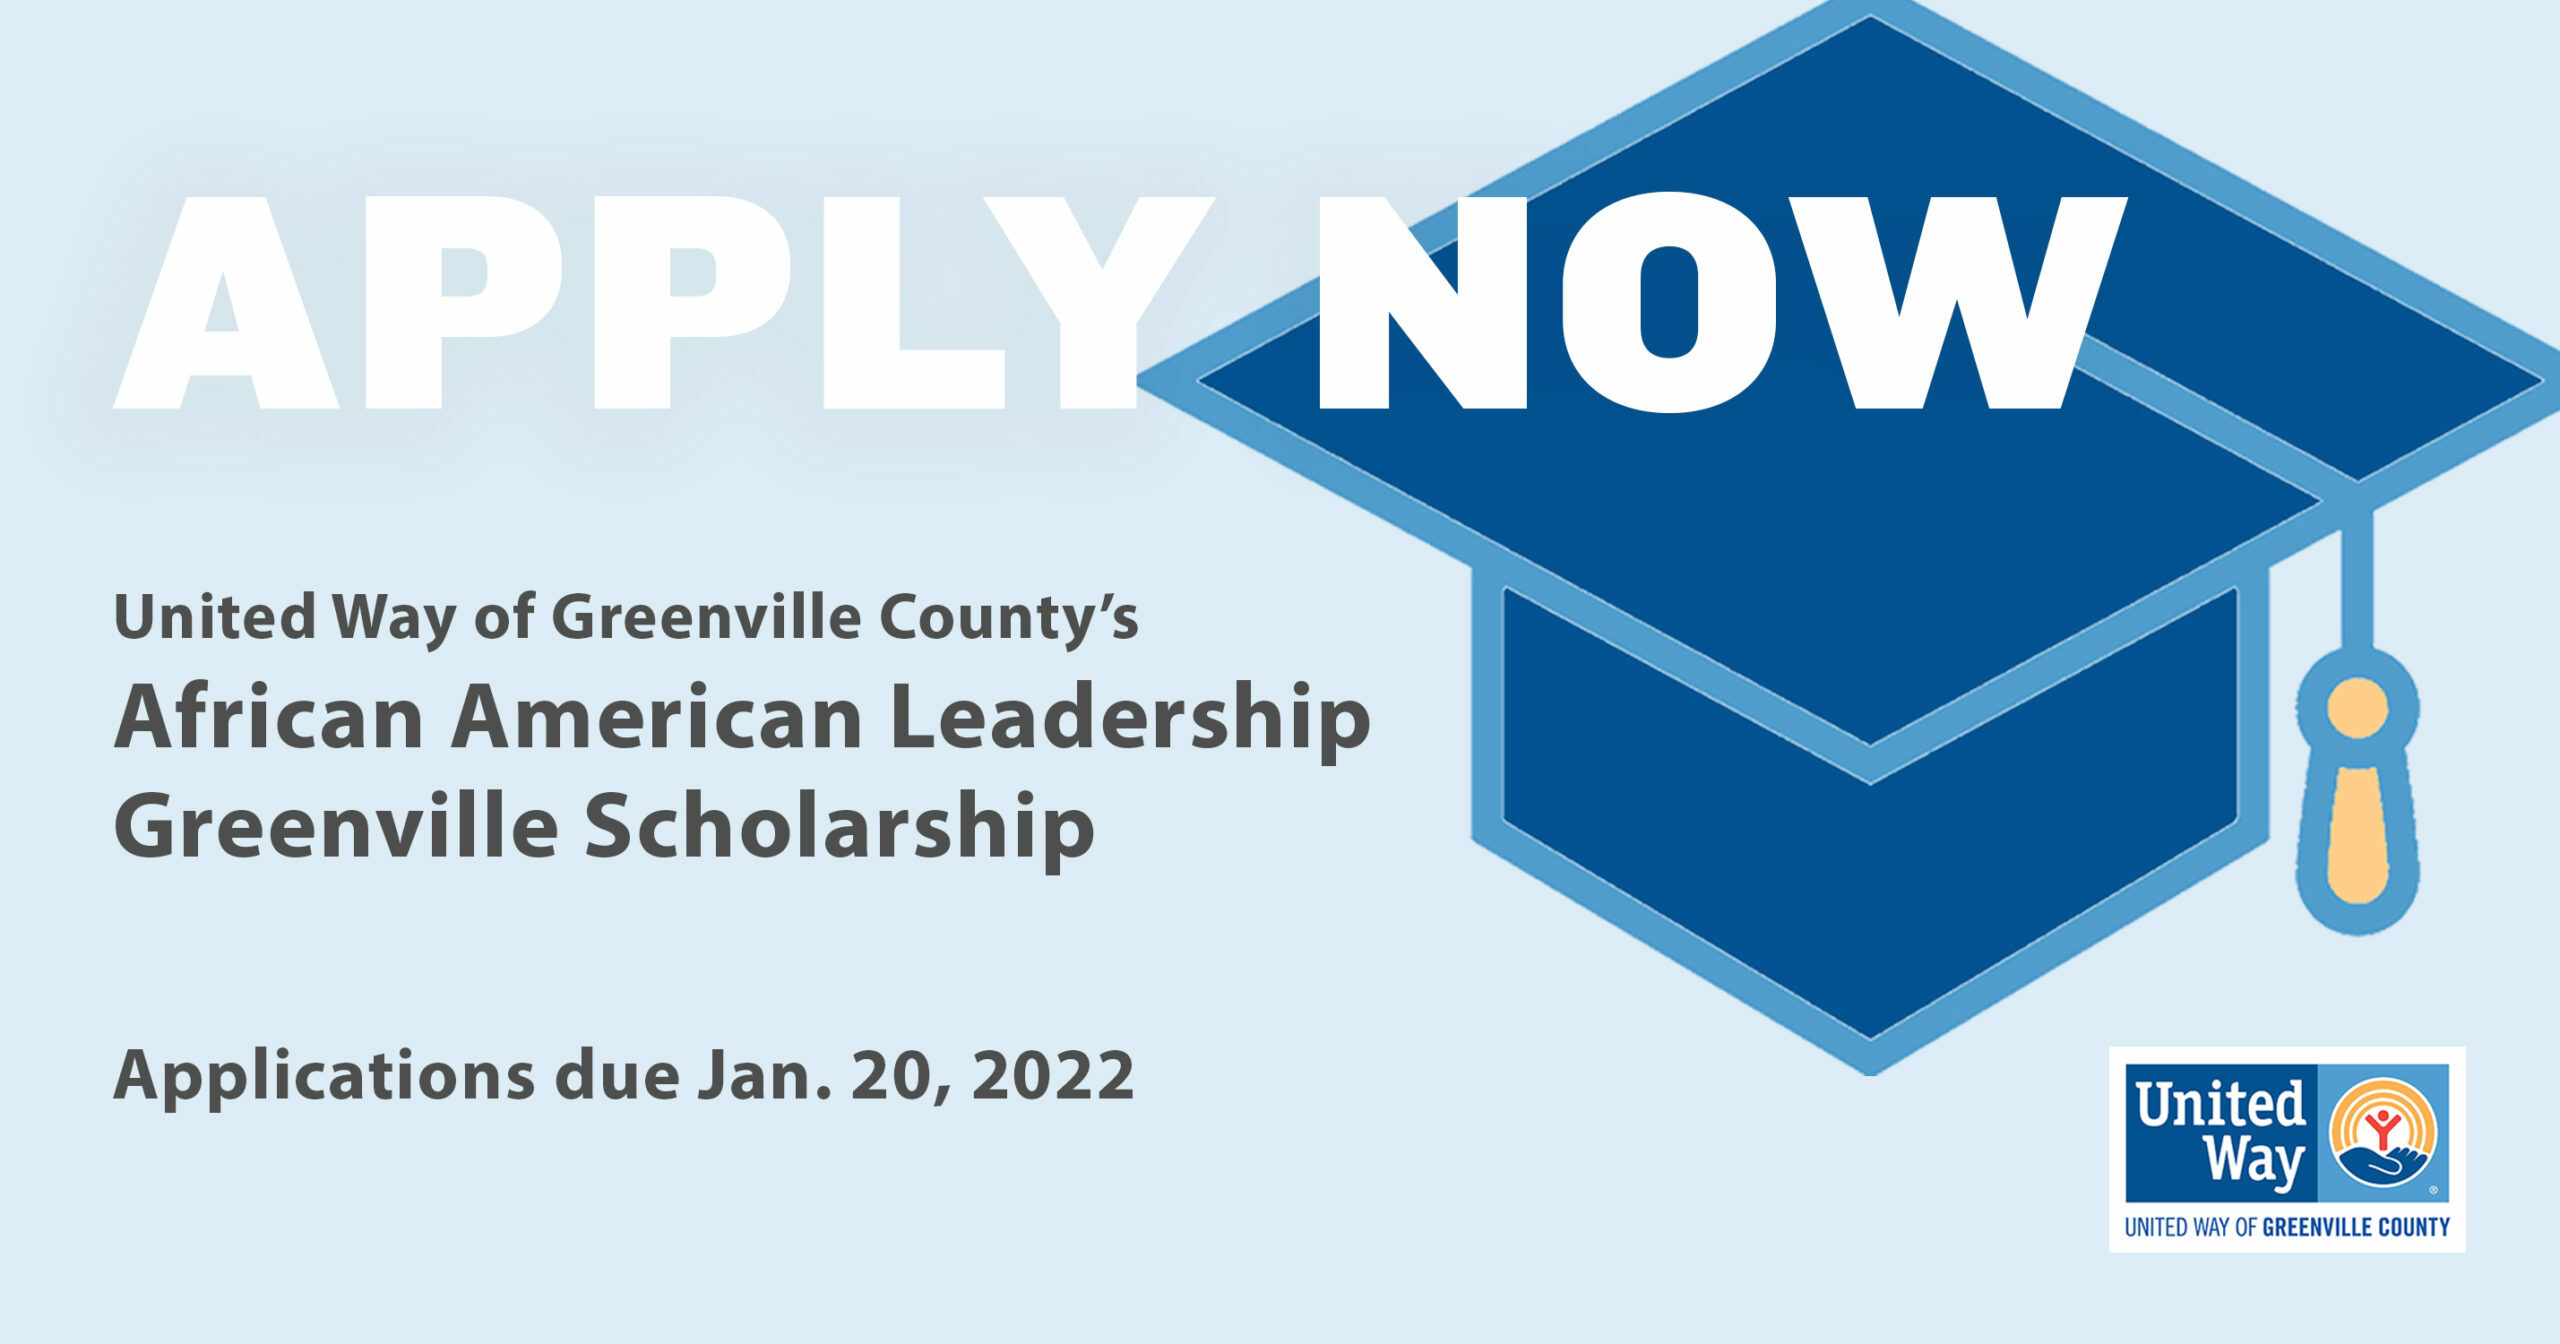 United Way African American Leadership announces $40K in scholarships for Greenville County seniors